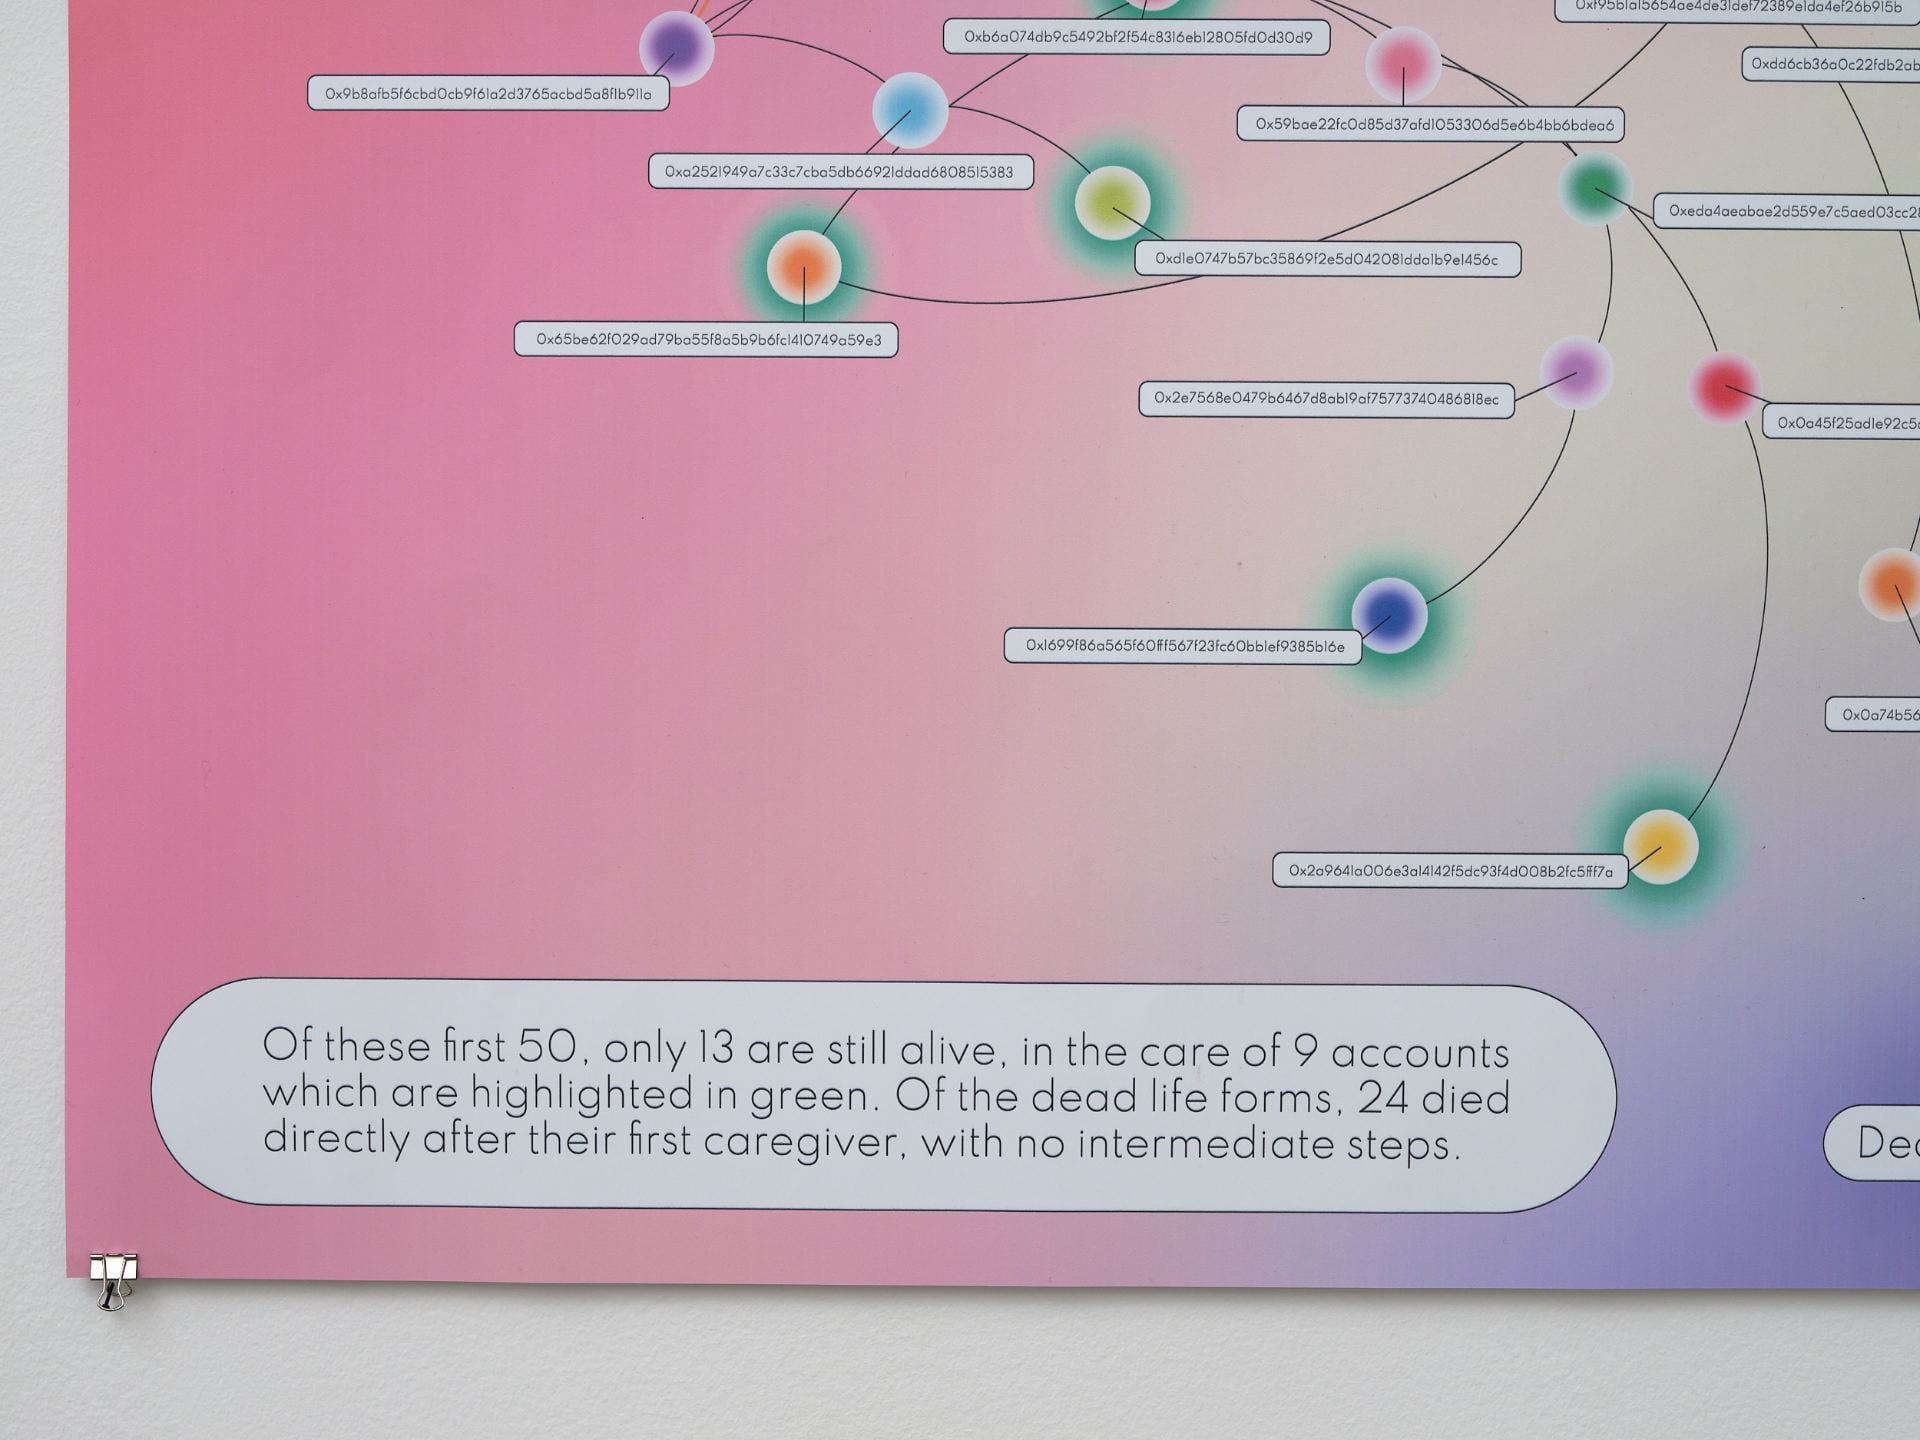 Close-up of a diagram describing the life-cycle of the artist's special version of NFTs, designed to be deleted within 3 months of ownership if not gifted/sold.